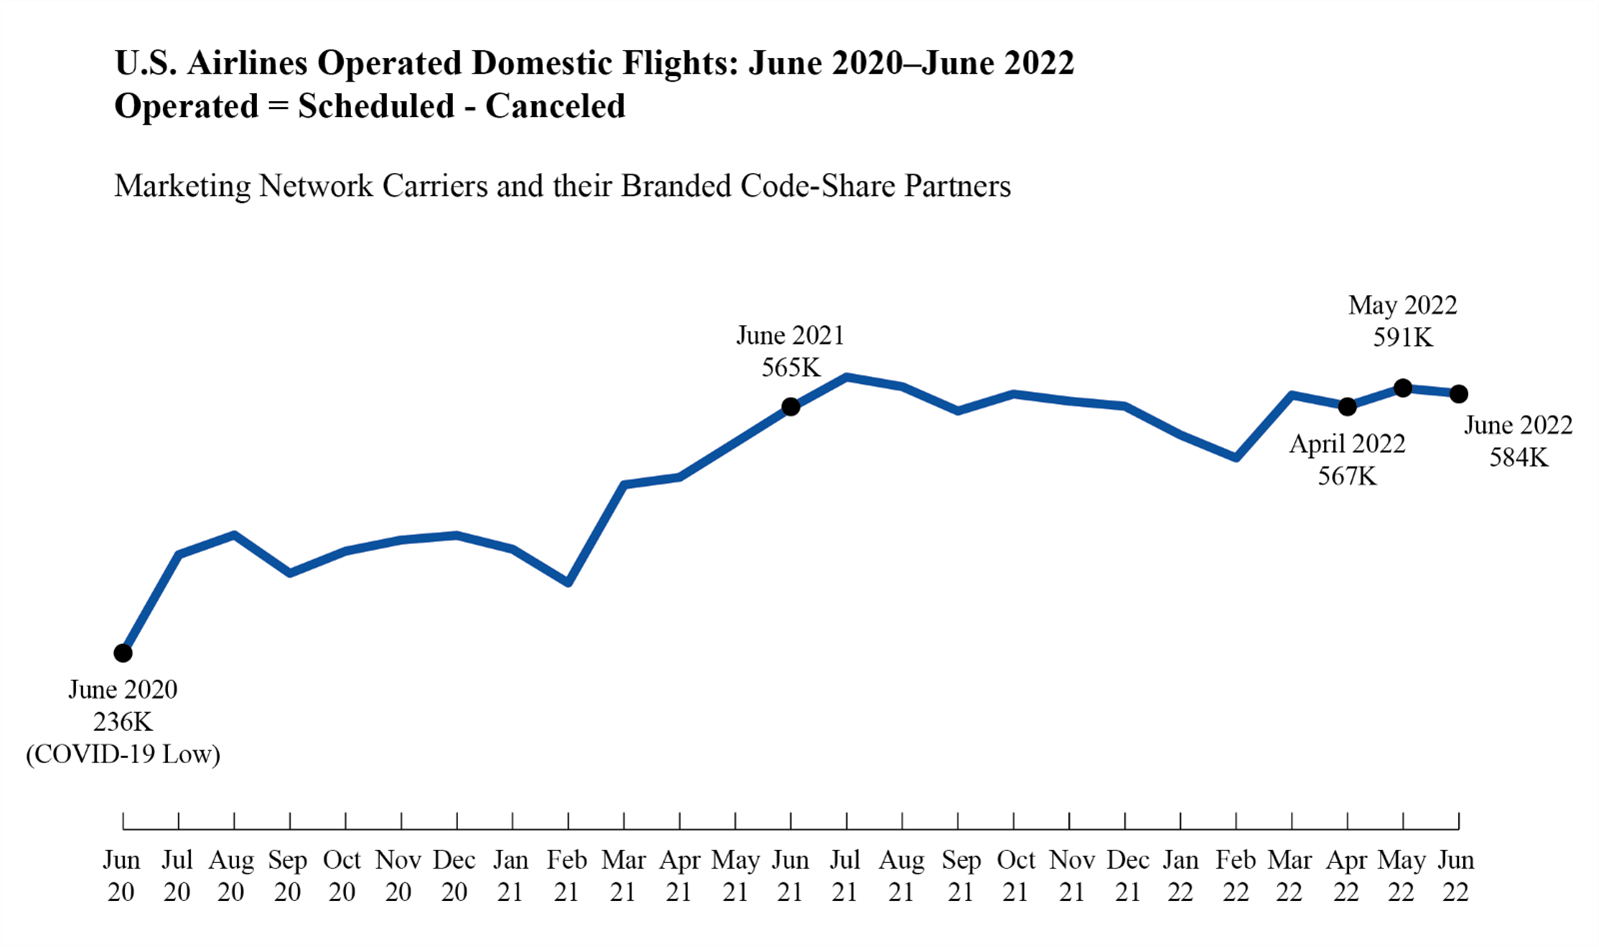 U.S. Airlines Operated Domestic Flights: June 2020-June 2022 graph